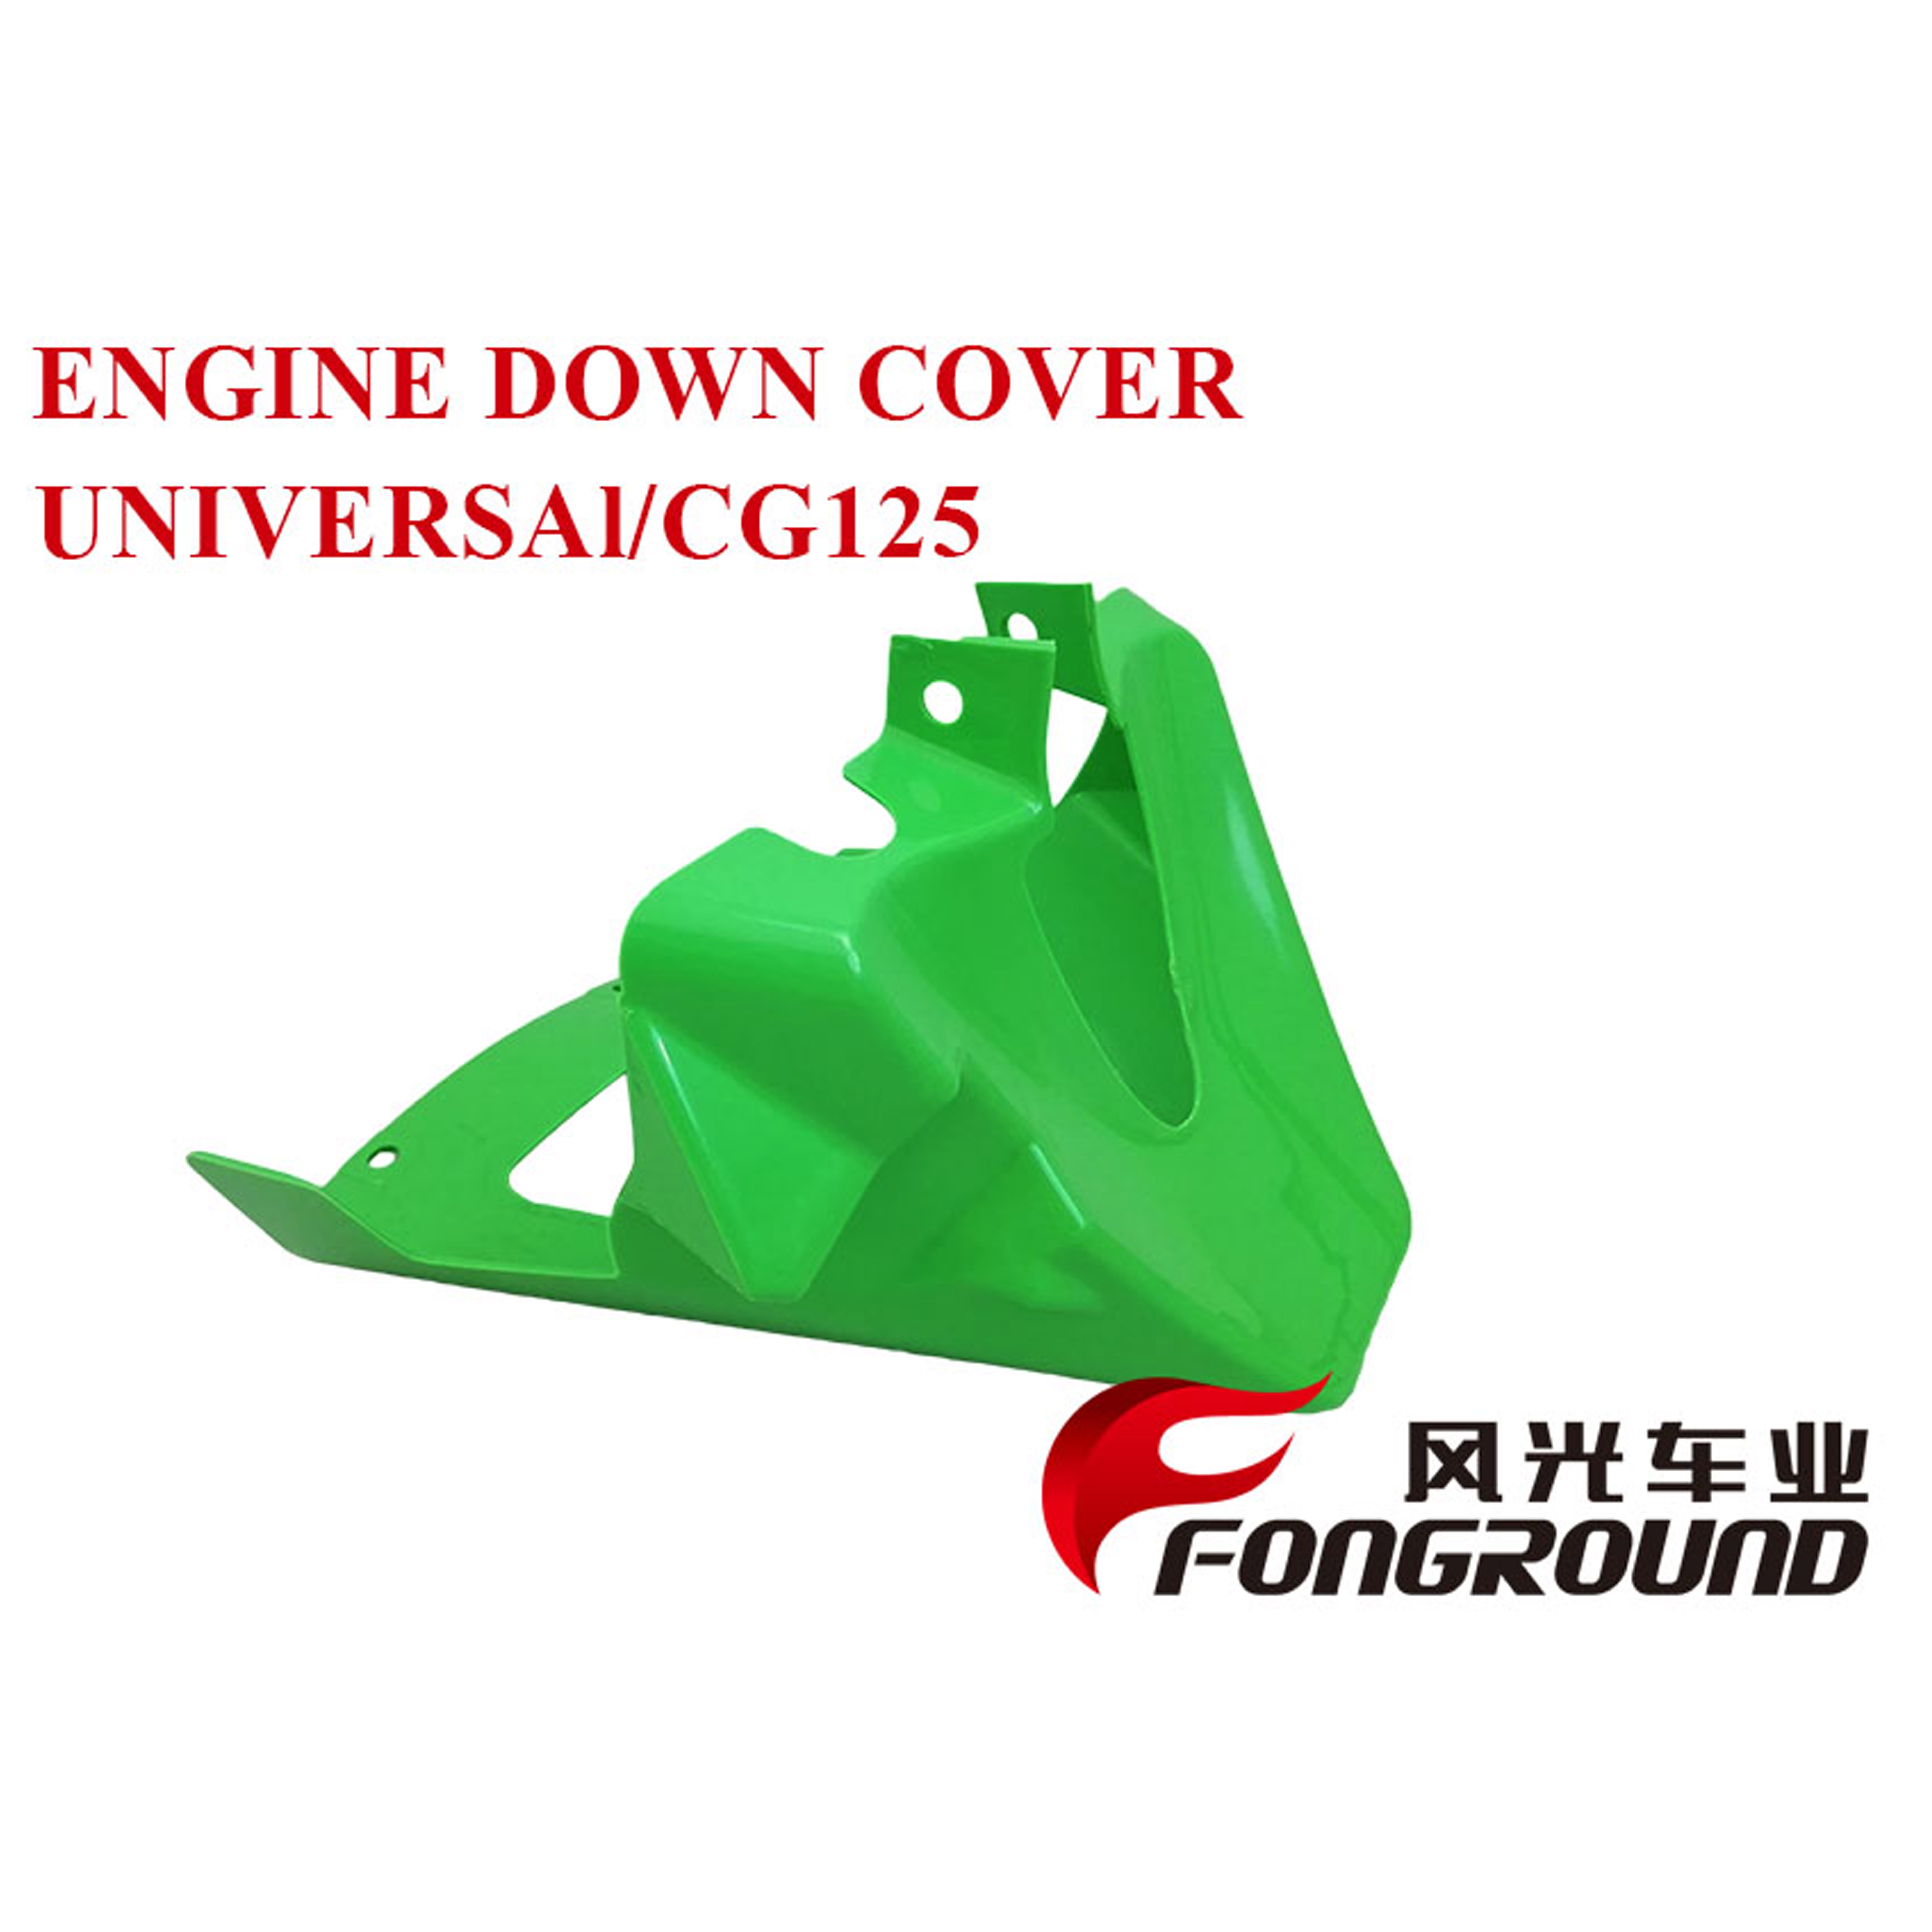 MOTORCYCLE ENGINE COVER